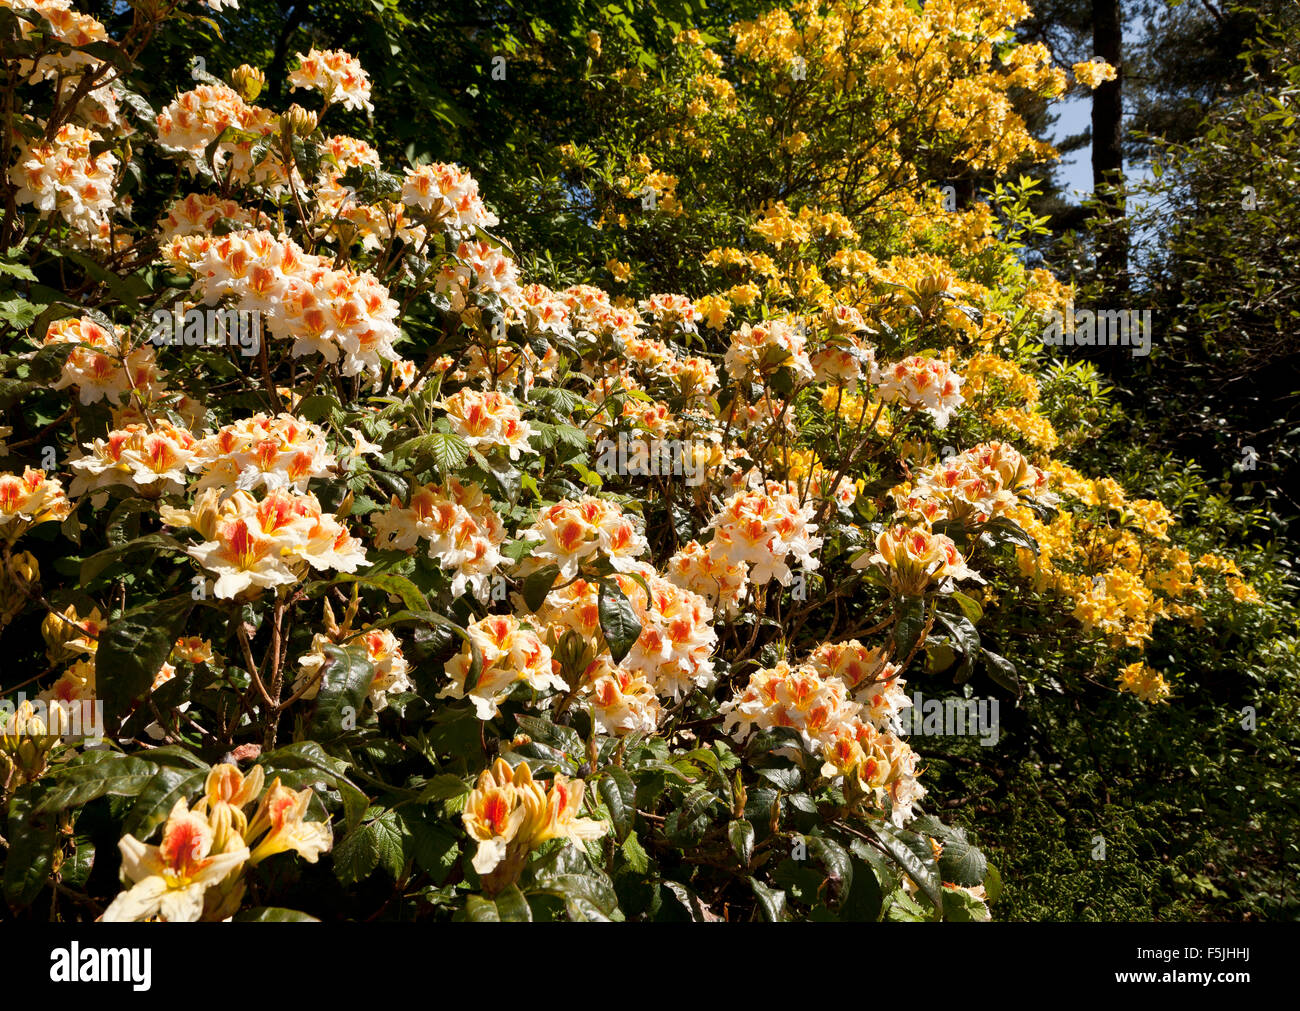 Rhododendron and Azalea flowers in full bloom Stock Photo